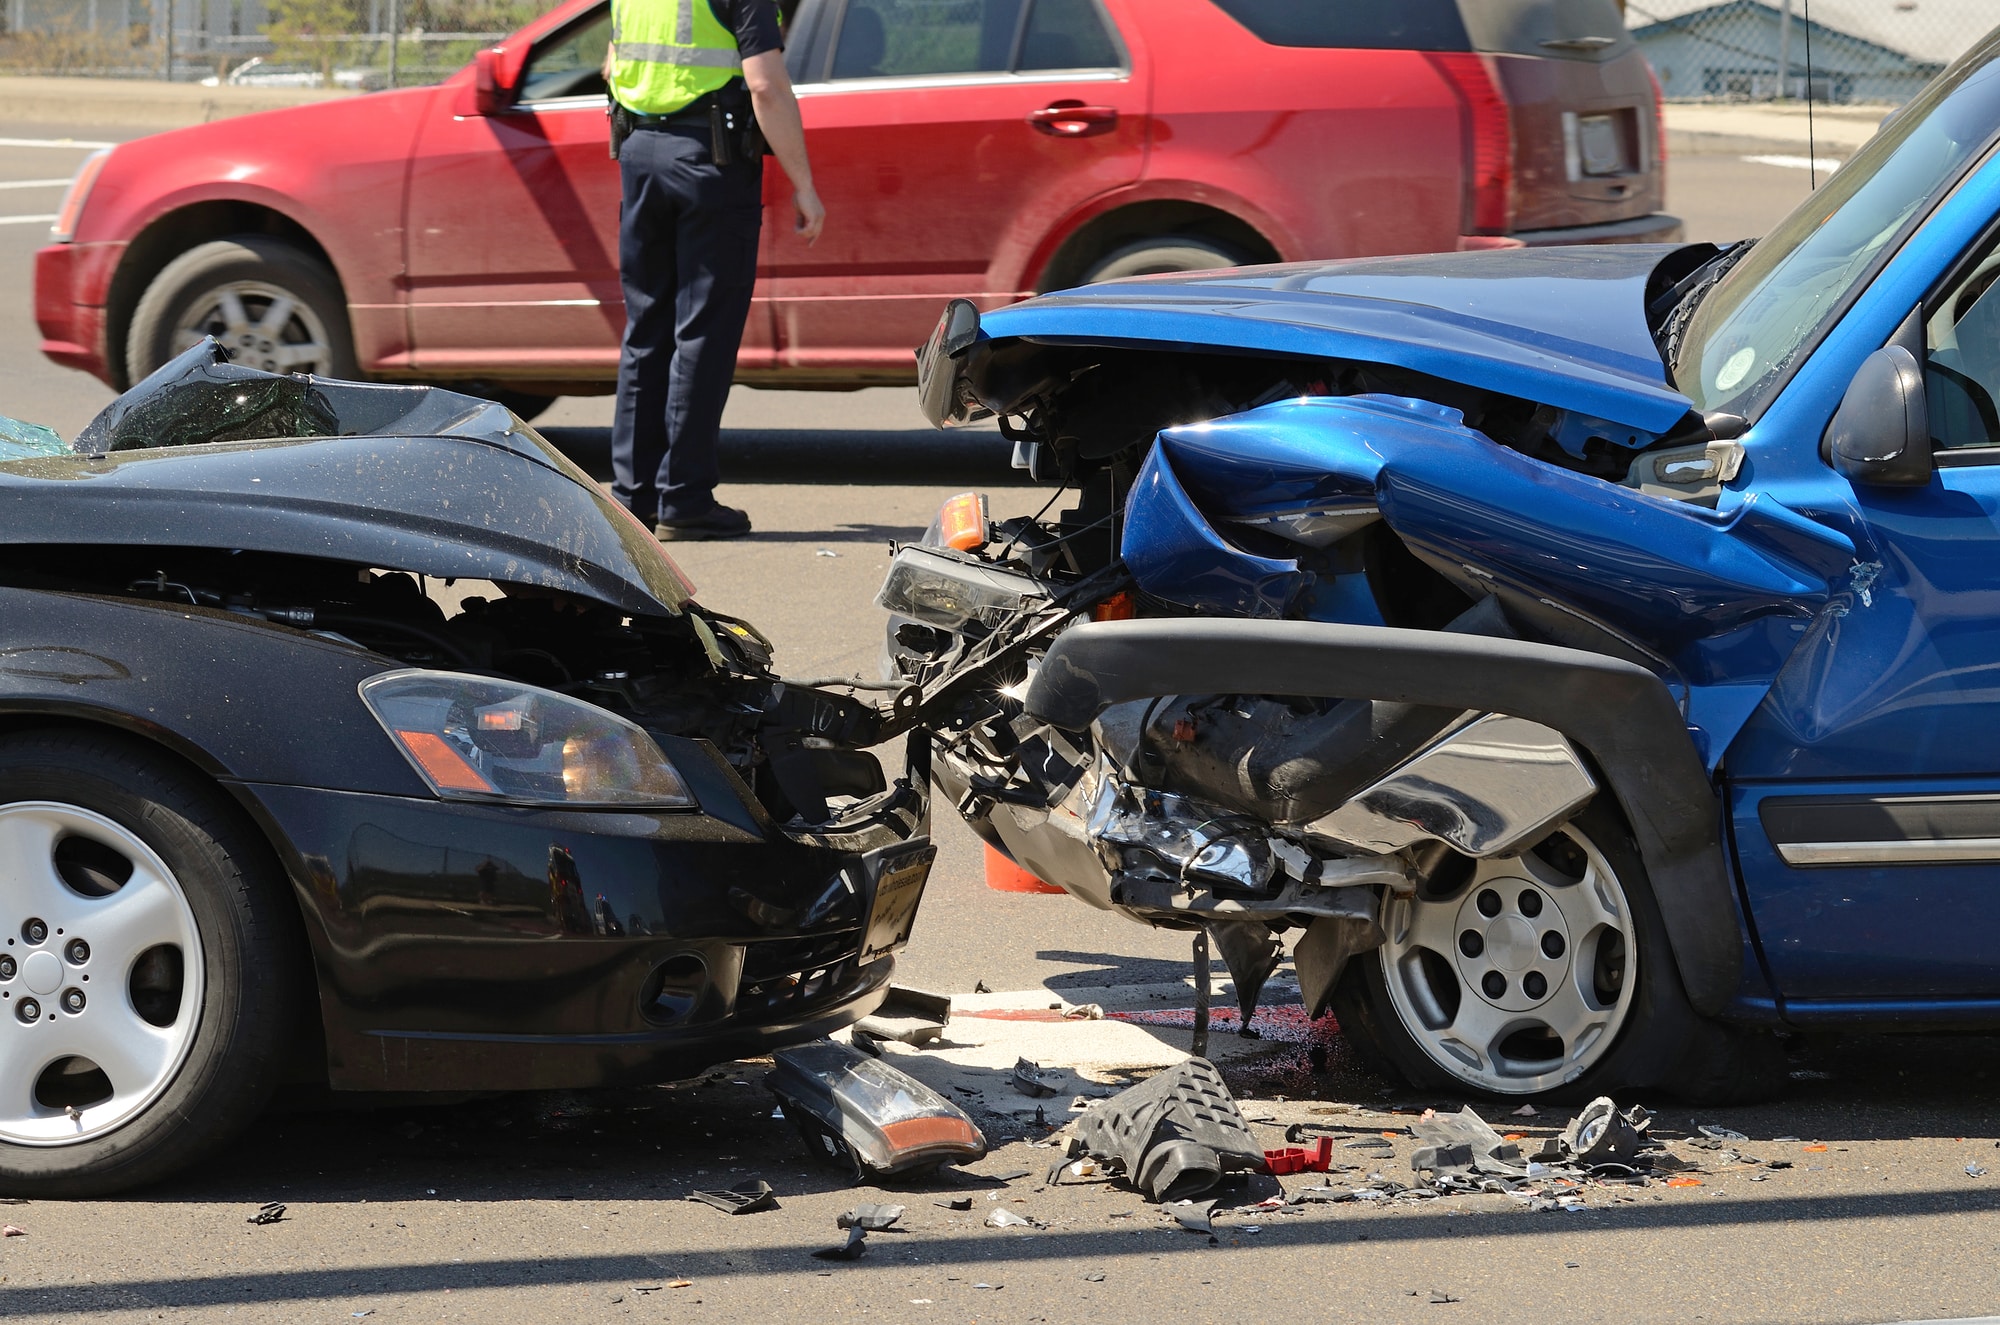 Do you need an attorney after a car accident?